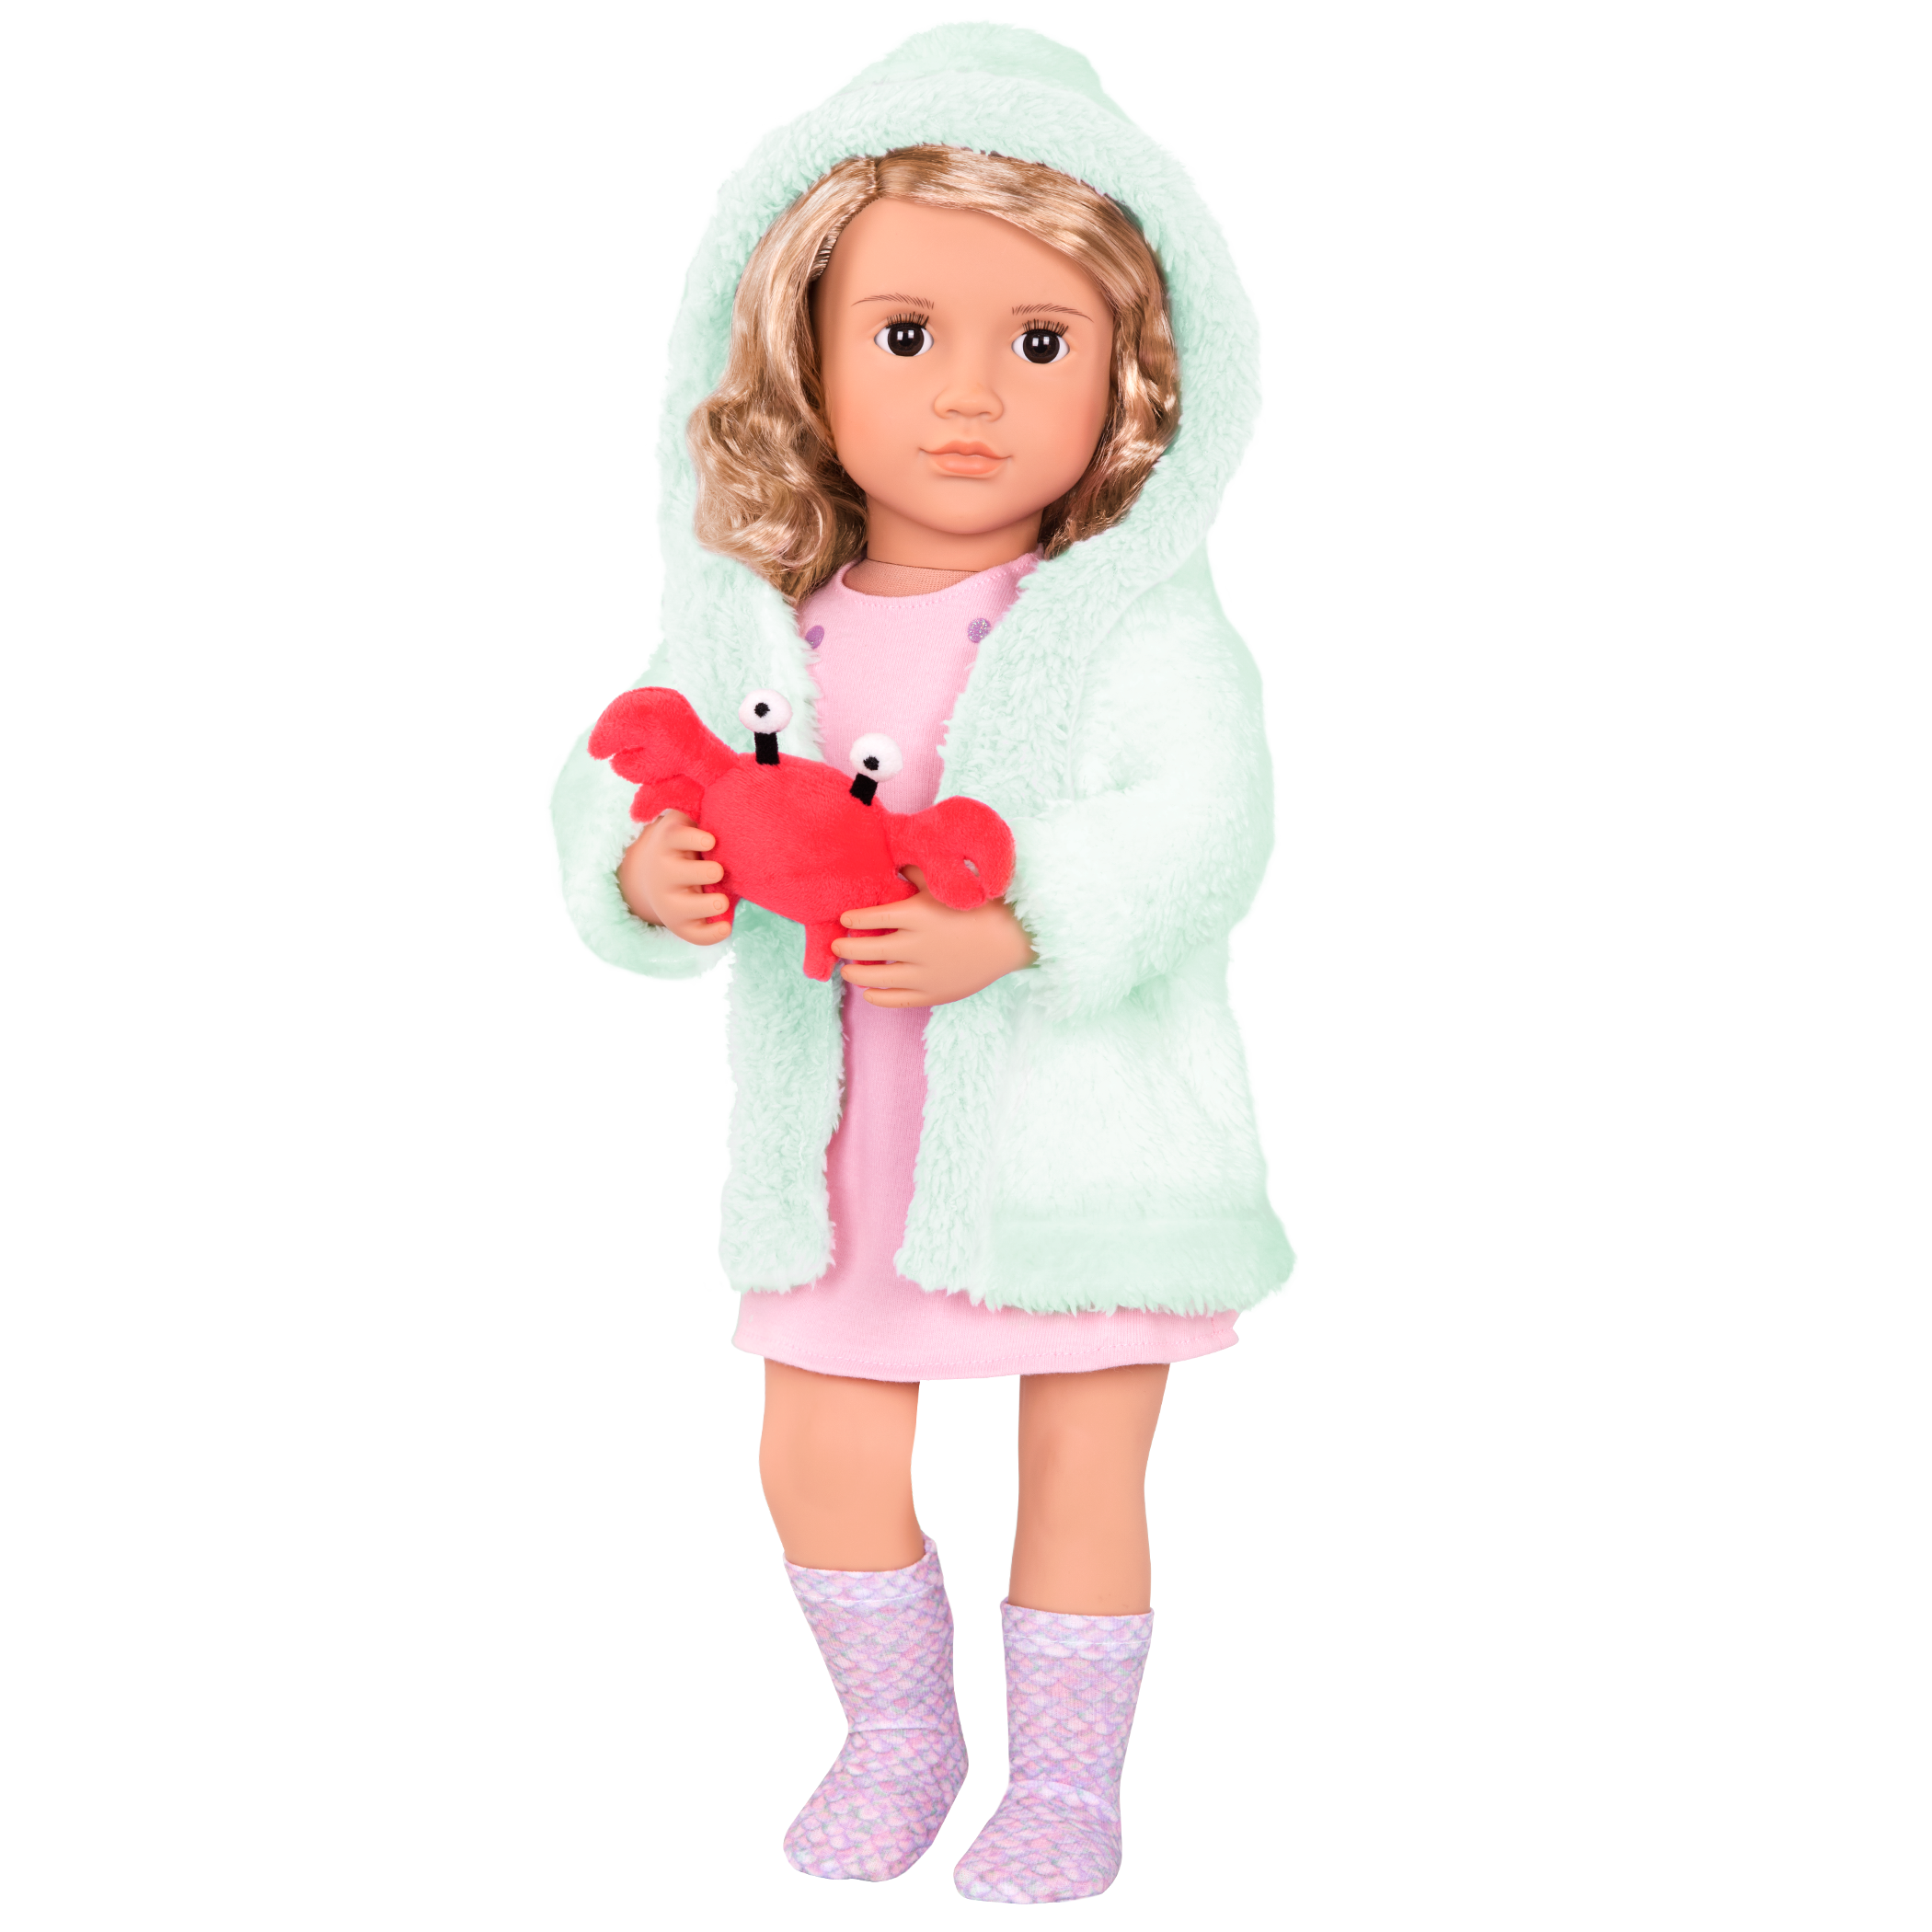 Noelle wearing Seaside Dreaming outfit with hood on